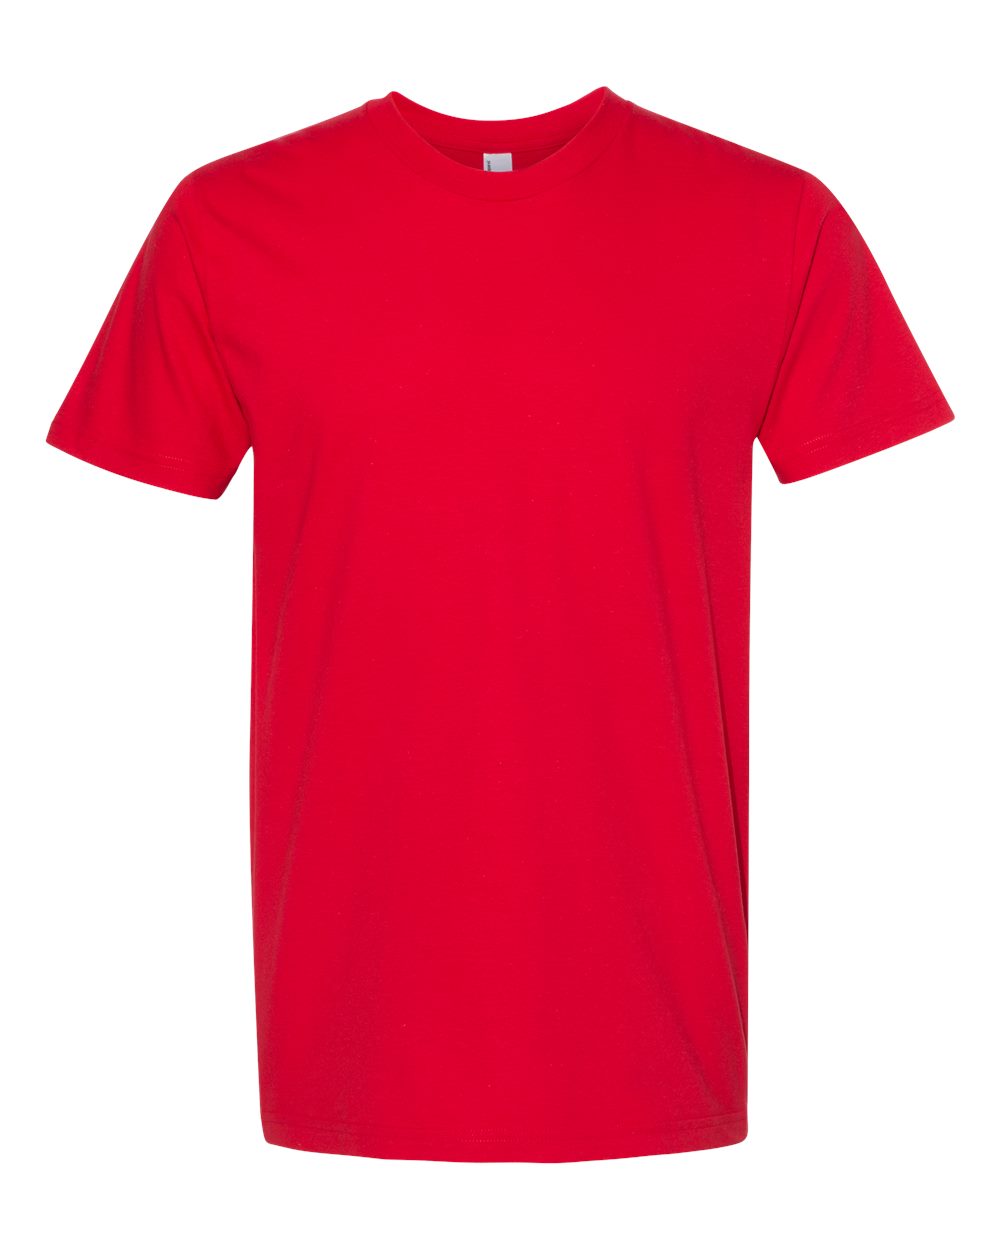 American Apparel Fine Jersey Tee 2001 #color_Red